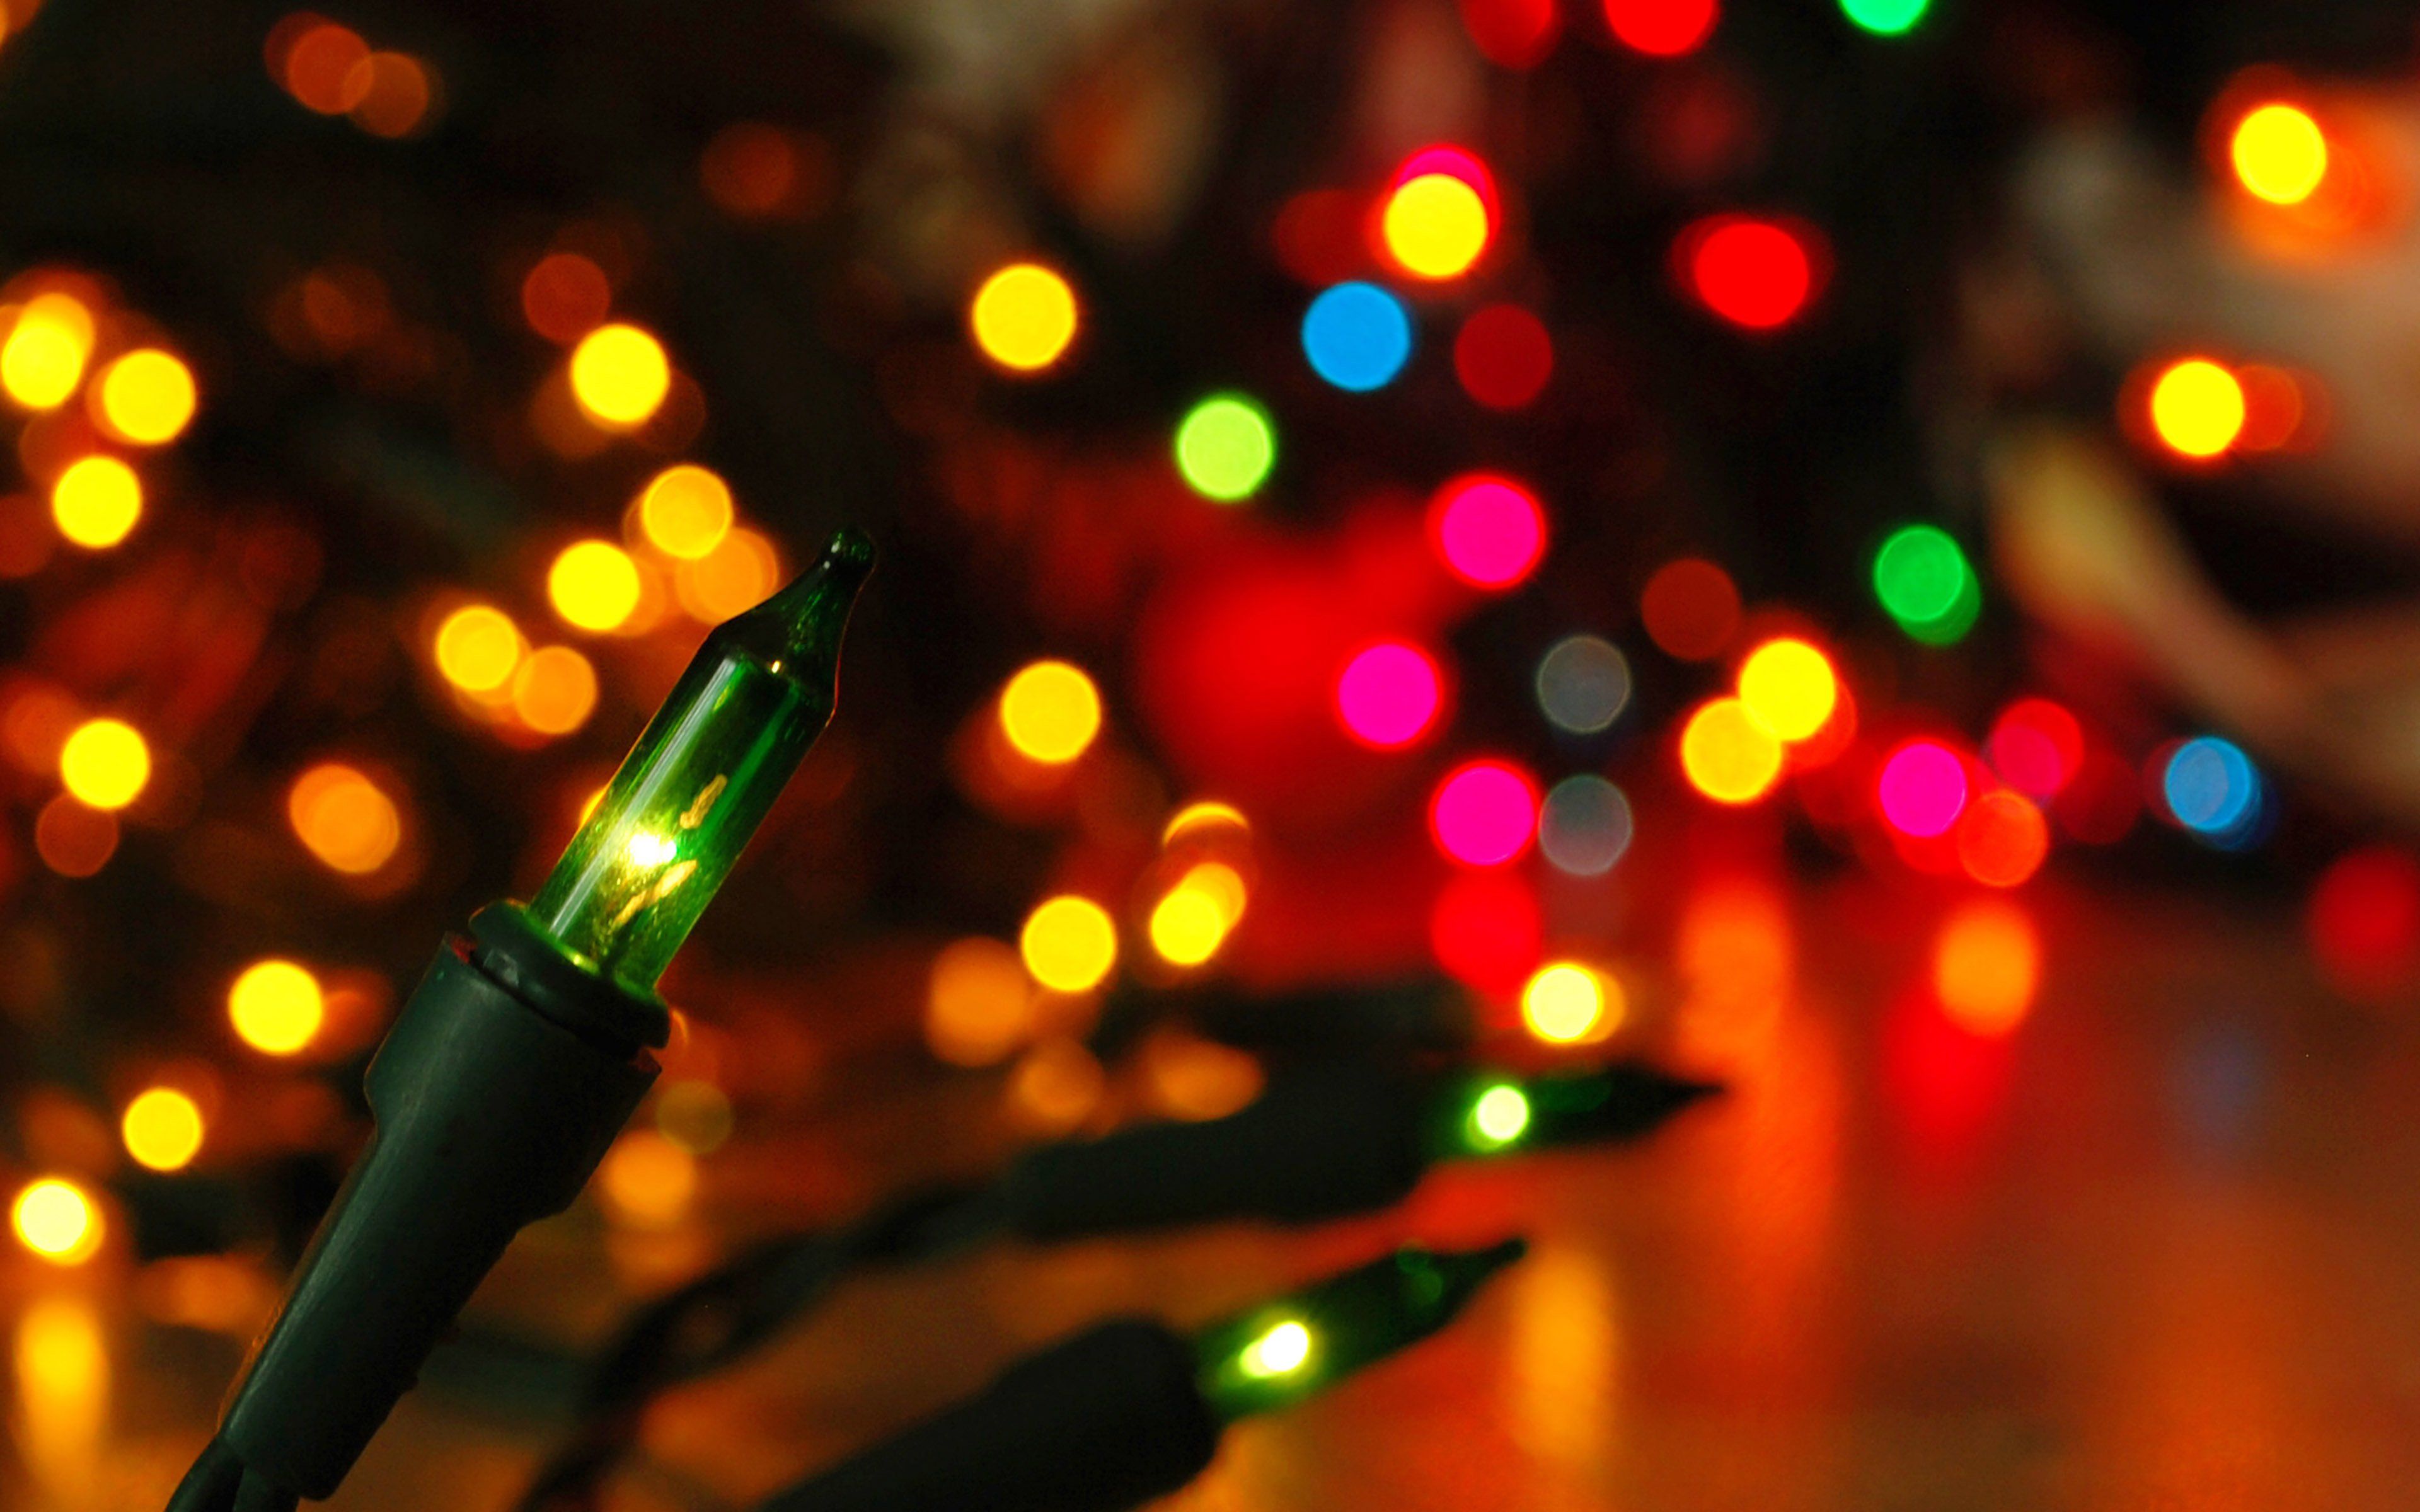 Christmas 4K wallpaper for your desktop or mobile screen free and easy to download